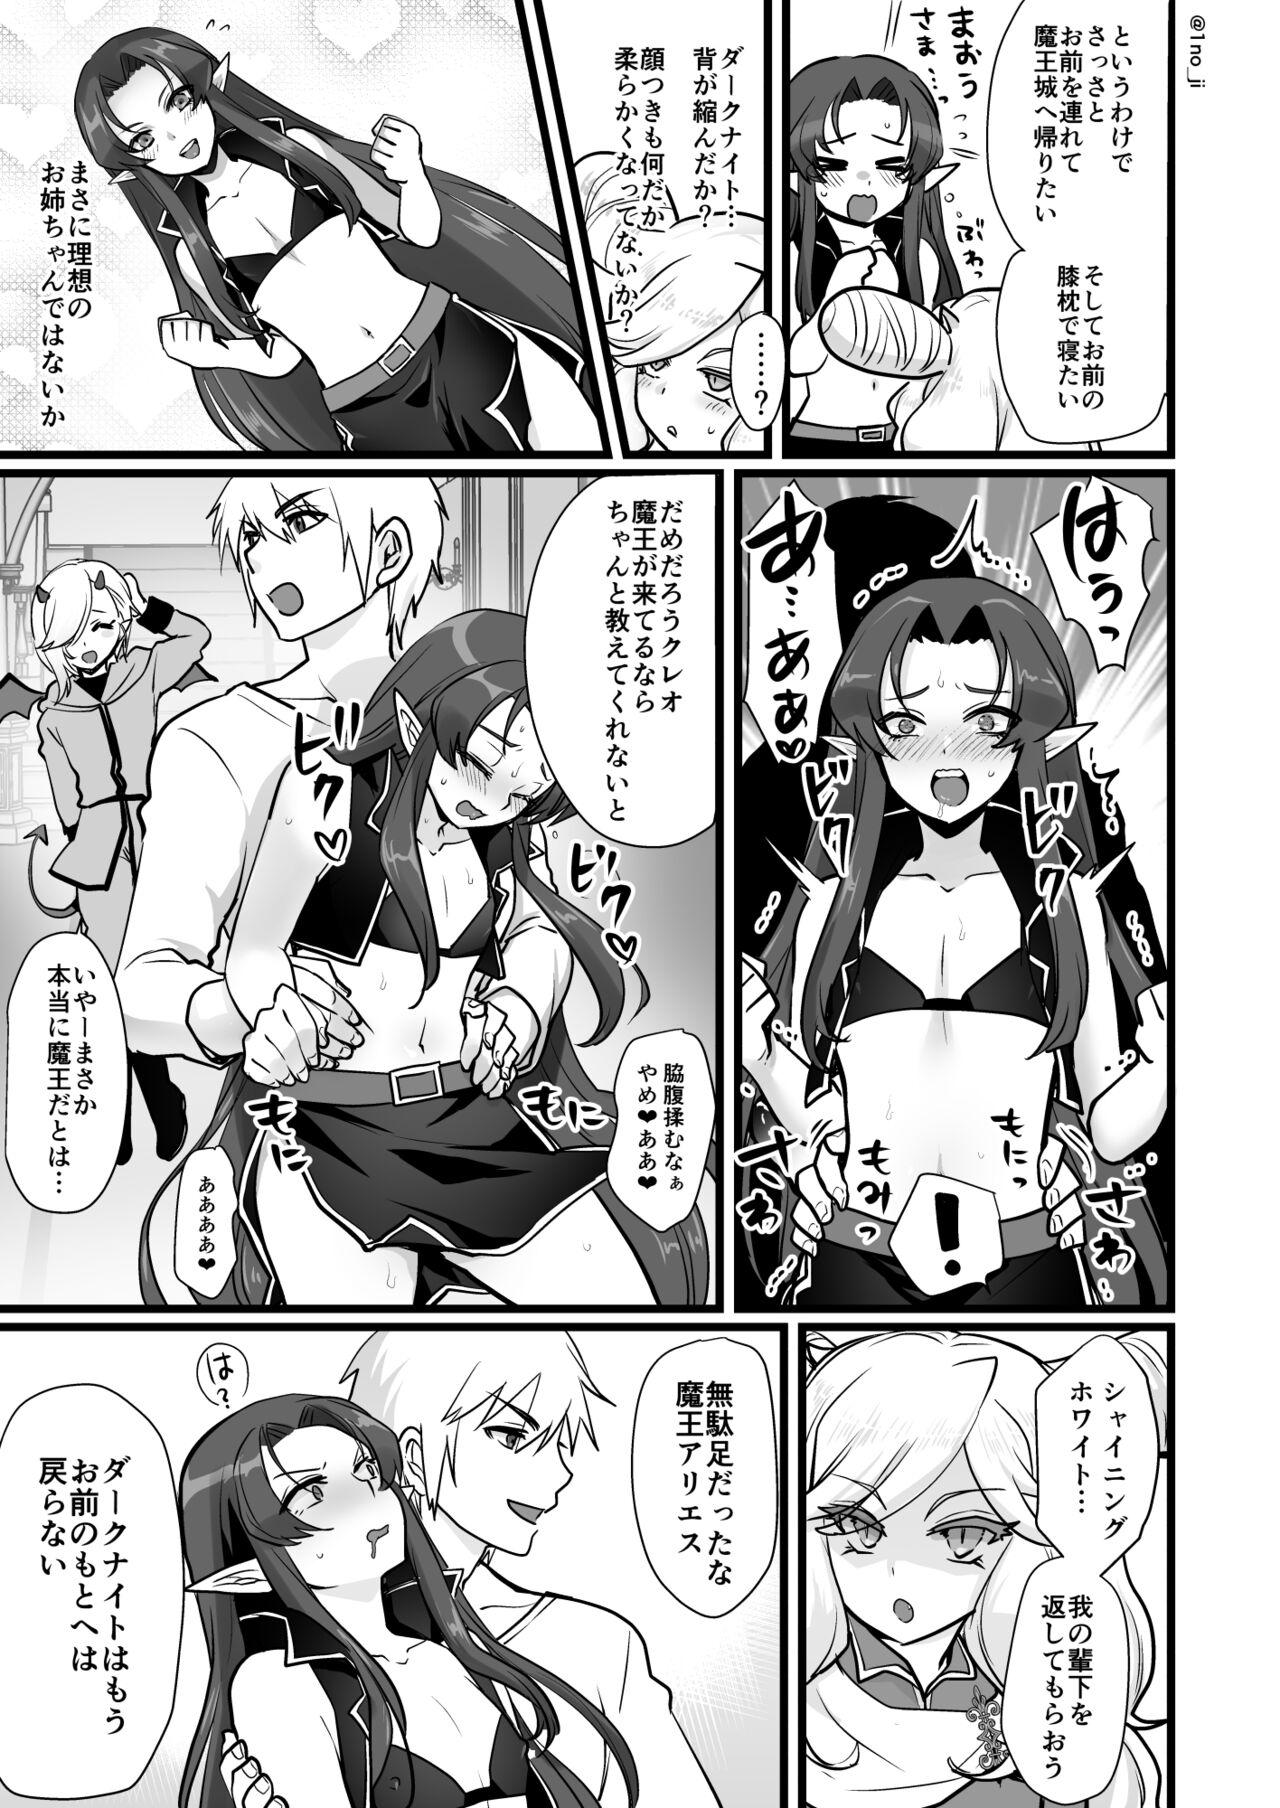 Couch 魔王軍の元幹部♂が勇者に負けてメスにされる話2【ダークナイトさんシリーズ】 - Original Groping - Page 10